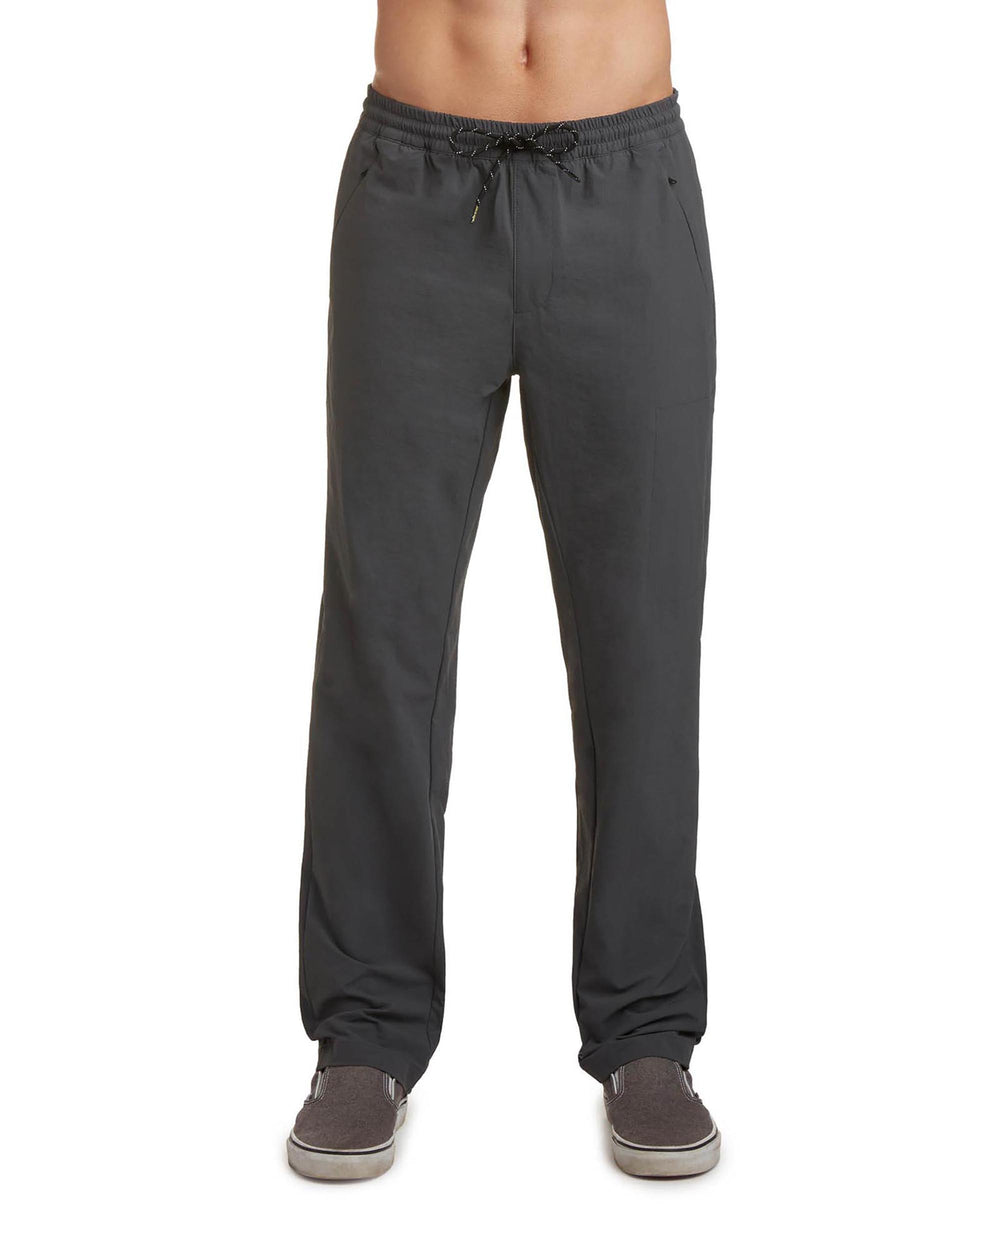 Men's Trainers Hybrid Track Pant | Charcoal | Body Glove